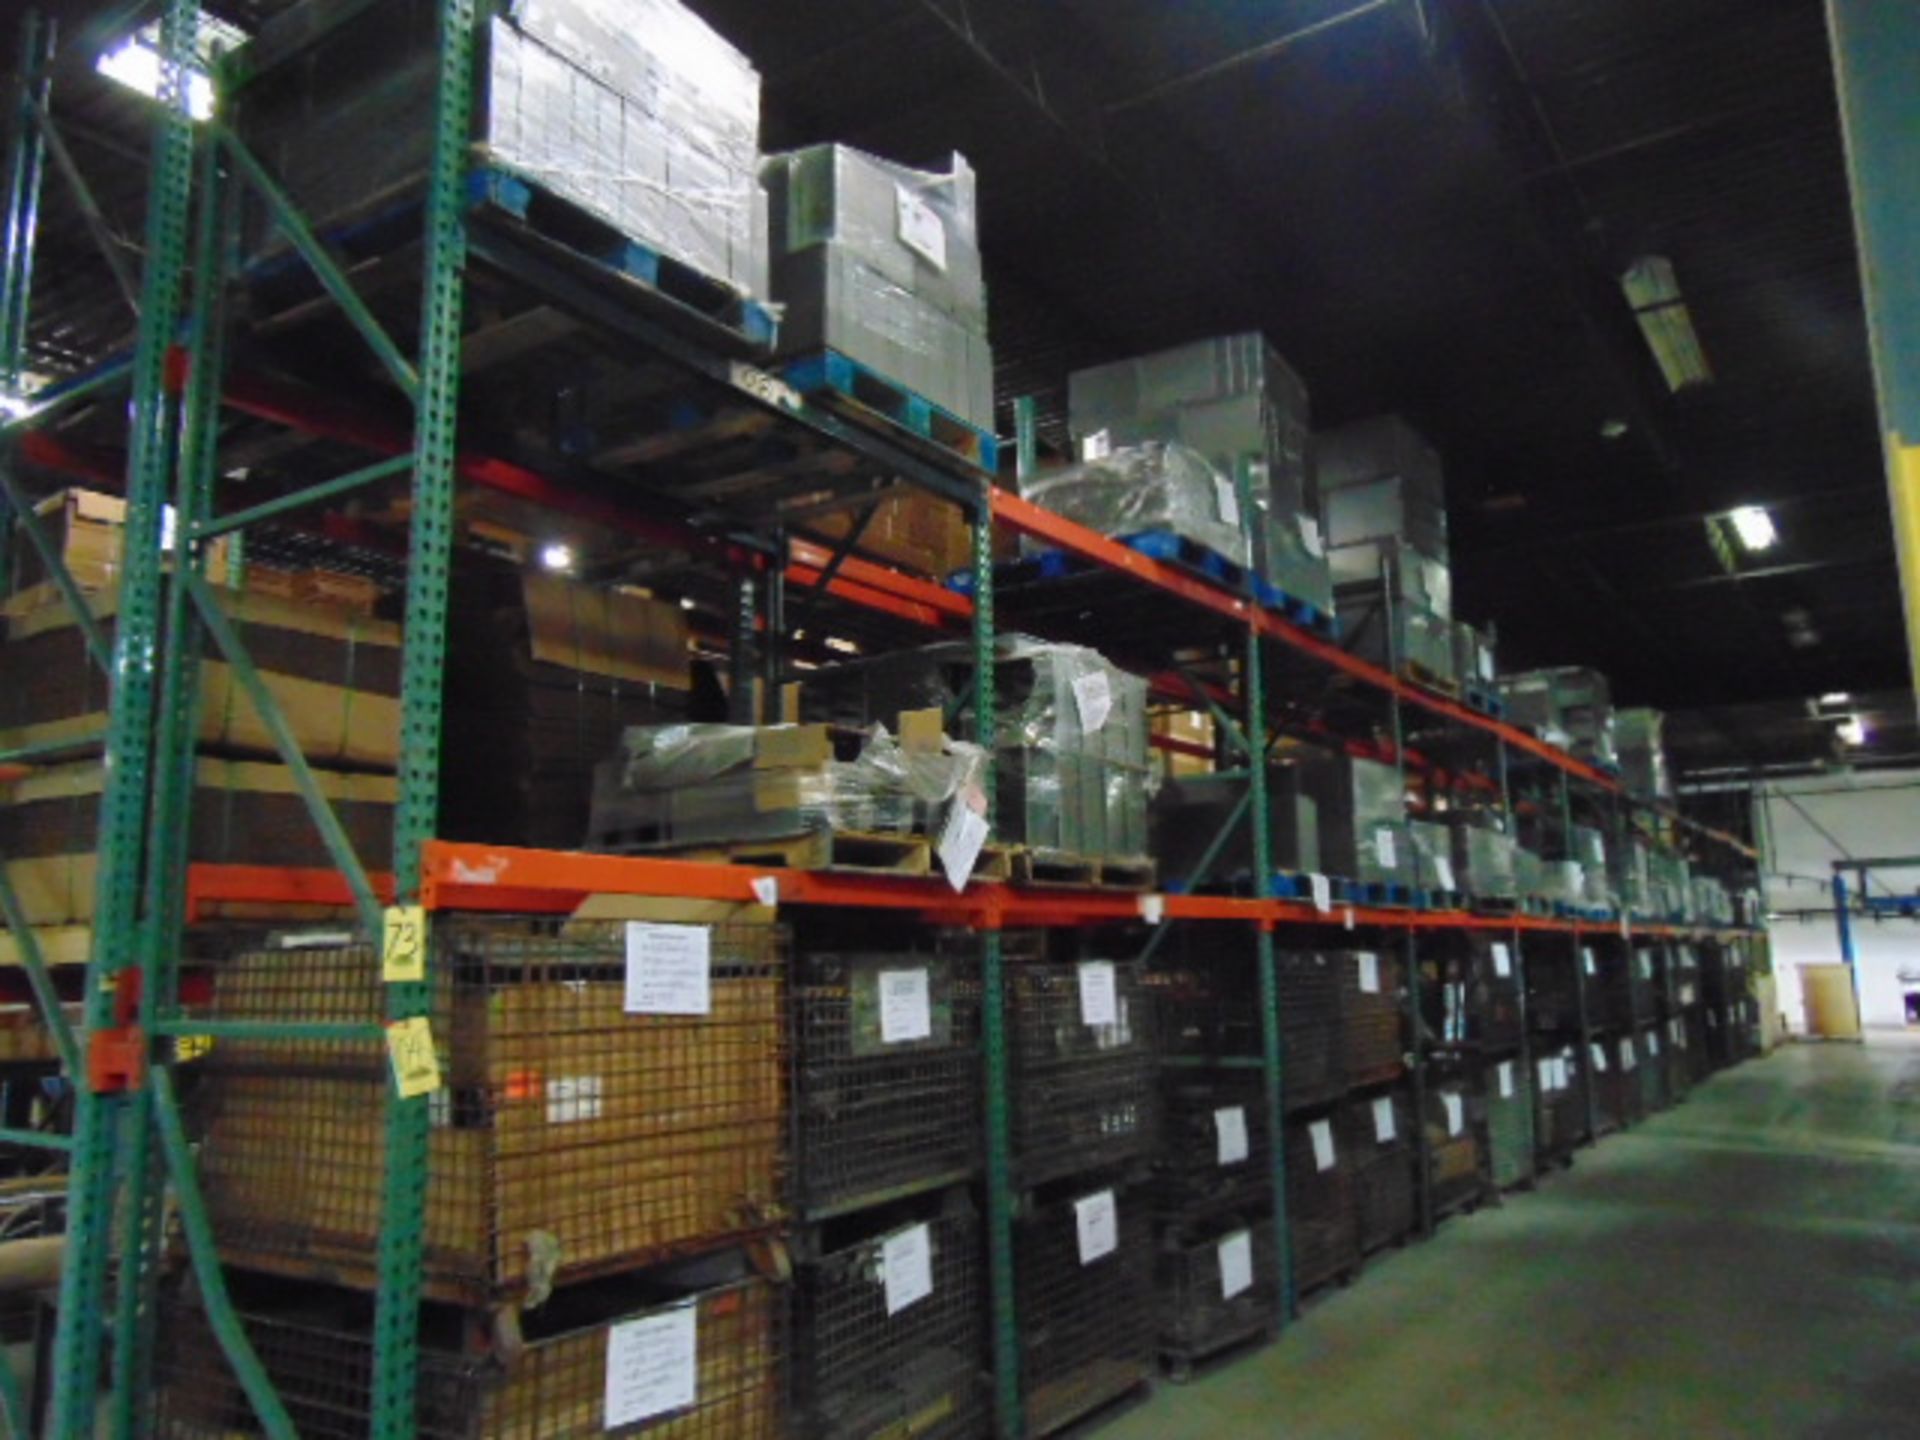 LOT CONTENTS OF PALLET RACKING SECTIONS (24) : steel parts, cardboard boxes (no powder coat or